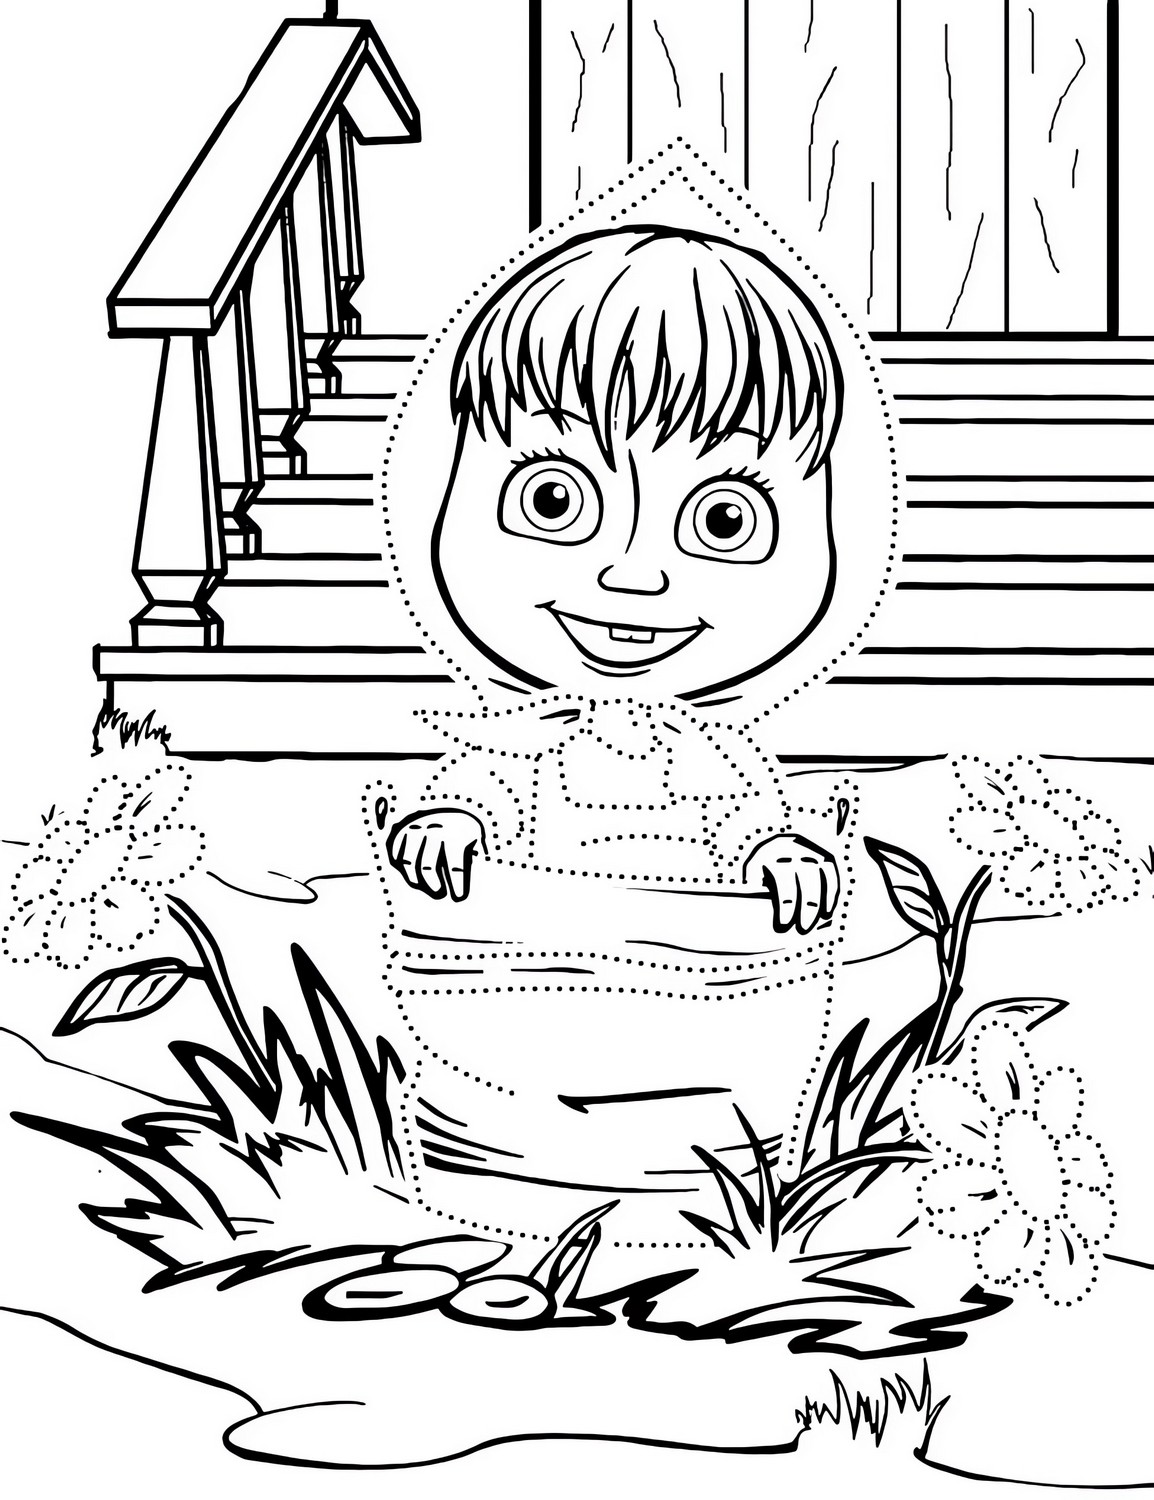 Masha and the Bear 06  coloring pages to print and coloring